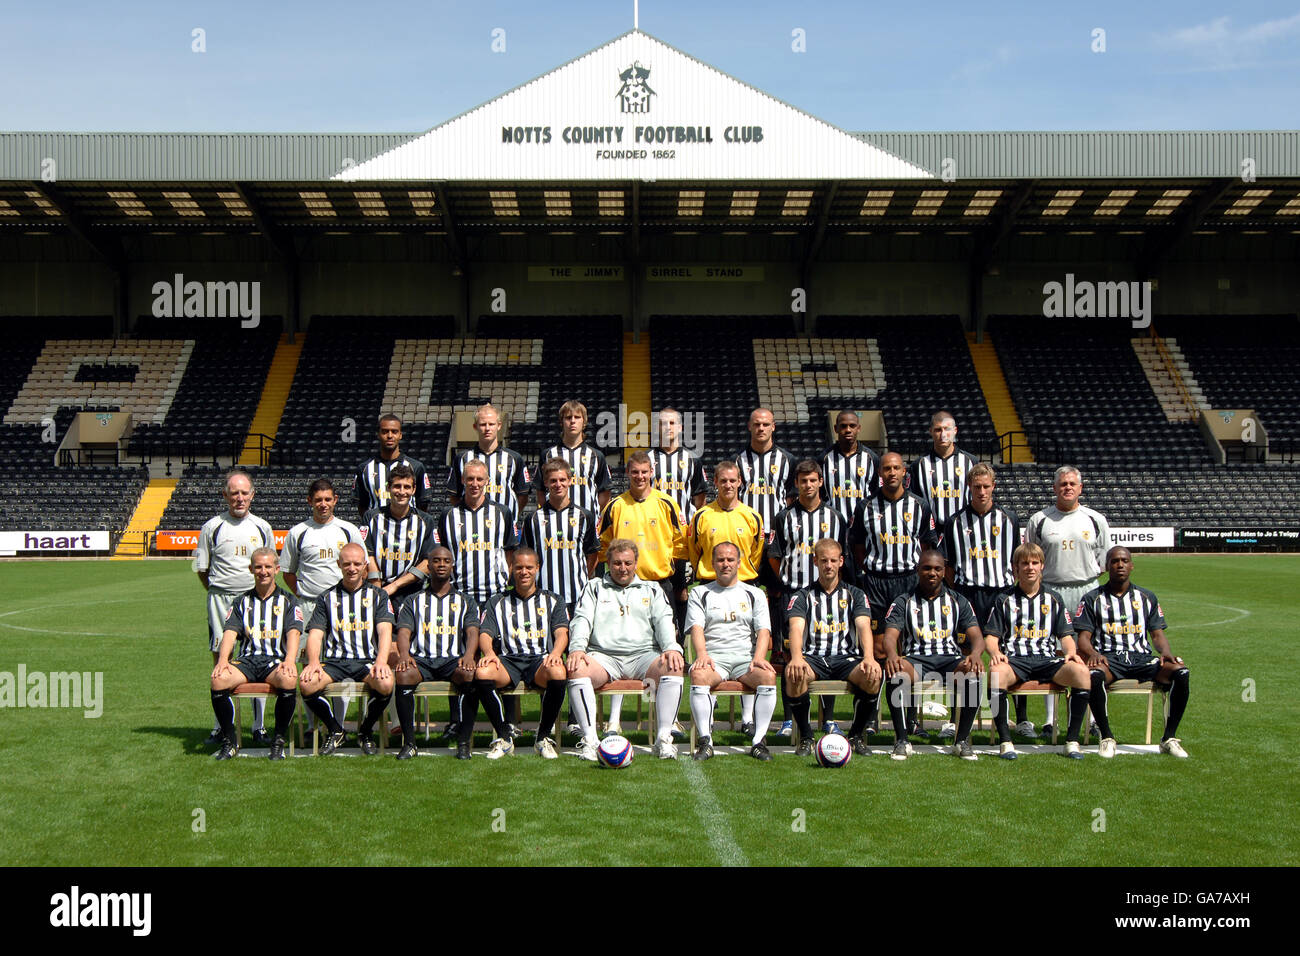 Soccer - Coca-Cola Football League Two - Notts County Photocall 2007/08 - Meadow Lane. Notts County team group Stock Photo